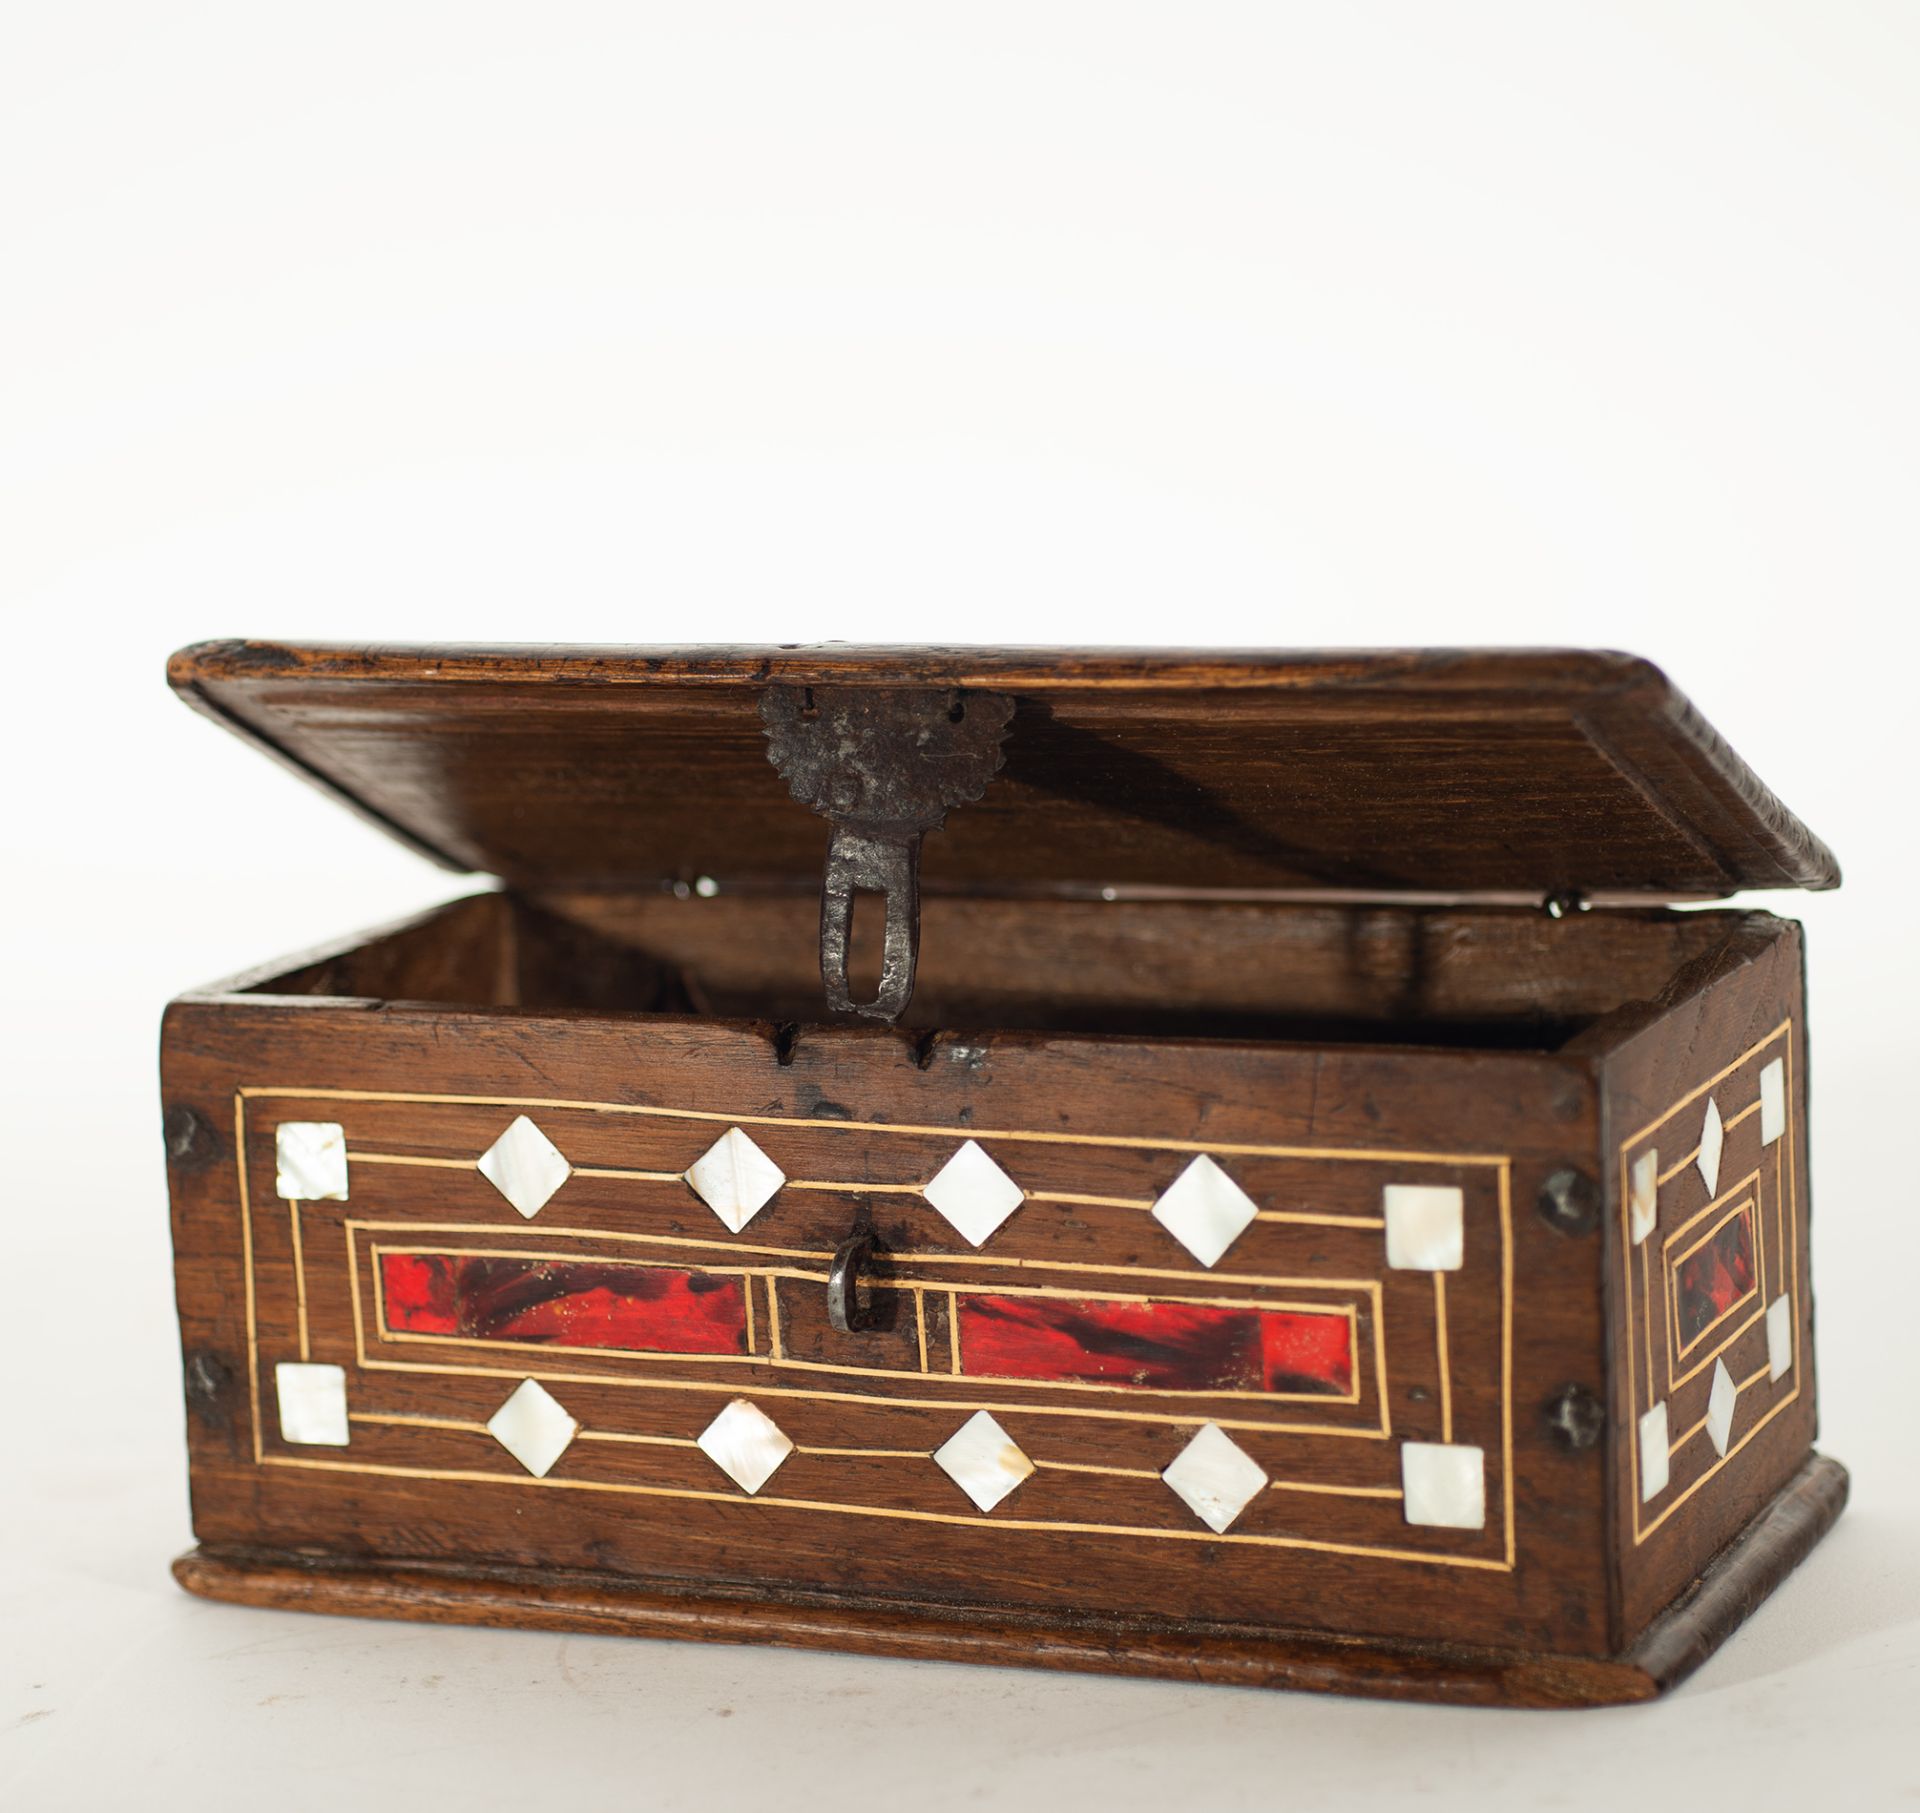 Cash box inlaid with mother-of-pearl, tortoiseshell and marquetry, Spanish school of the 18th-19th c - Image 4 of 4